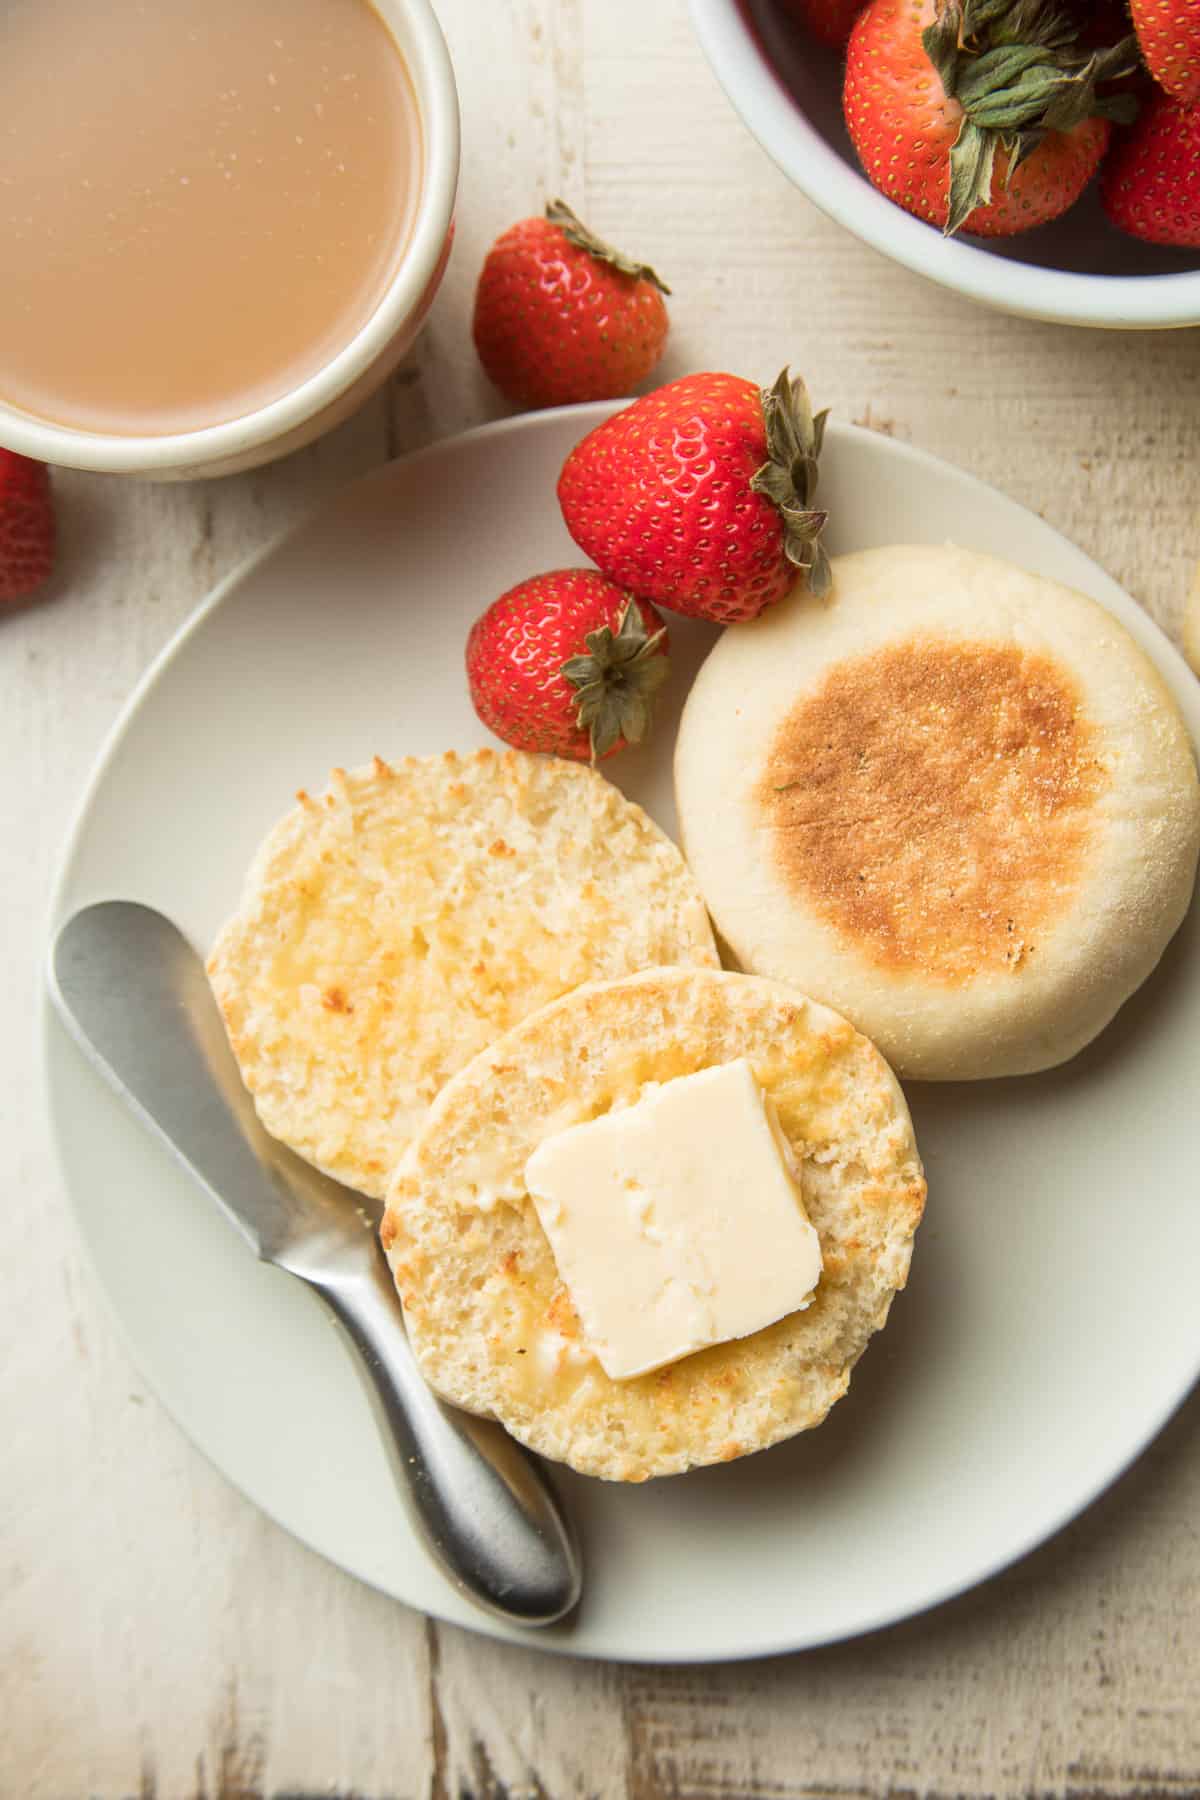 Plate with two Vegan English Muffins, butter, and strawberries.